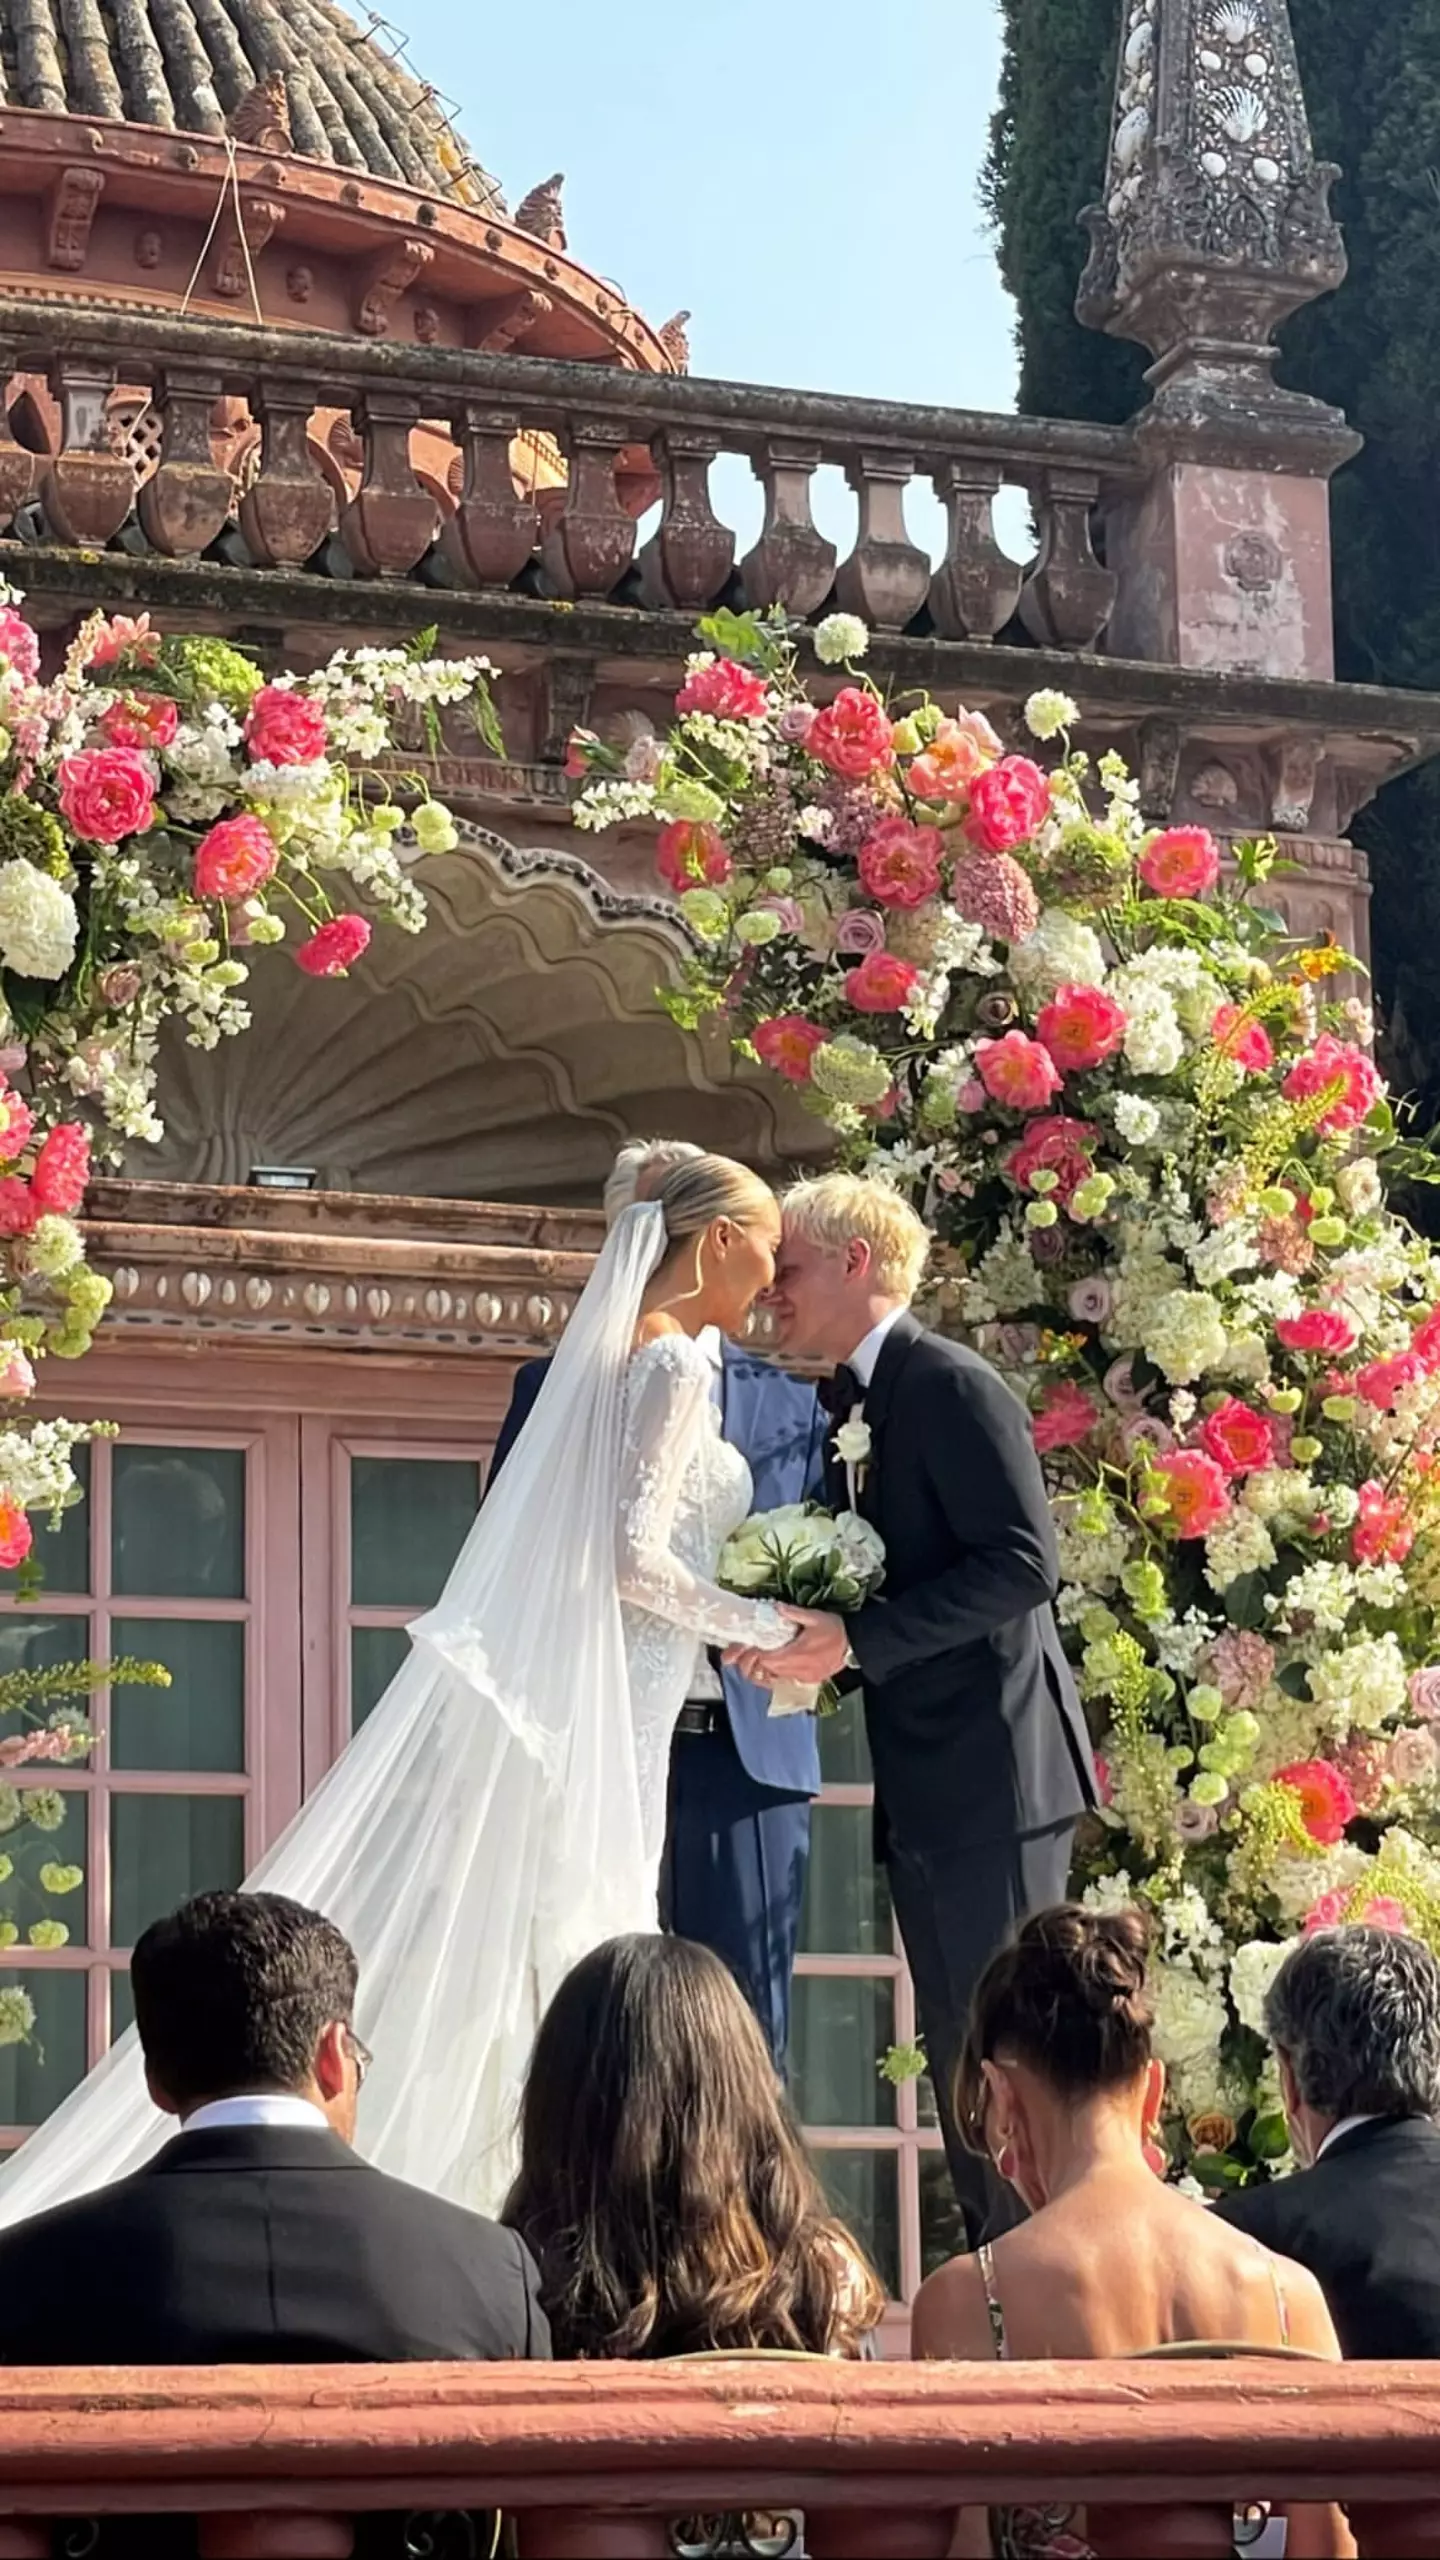 Jamie Laing tied the knot with Sophie Habboo in Spain.